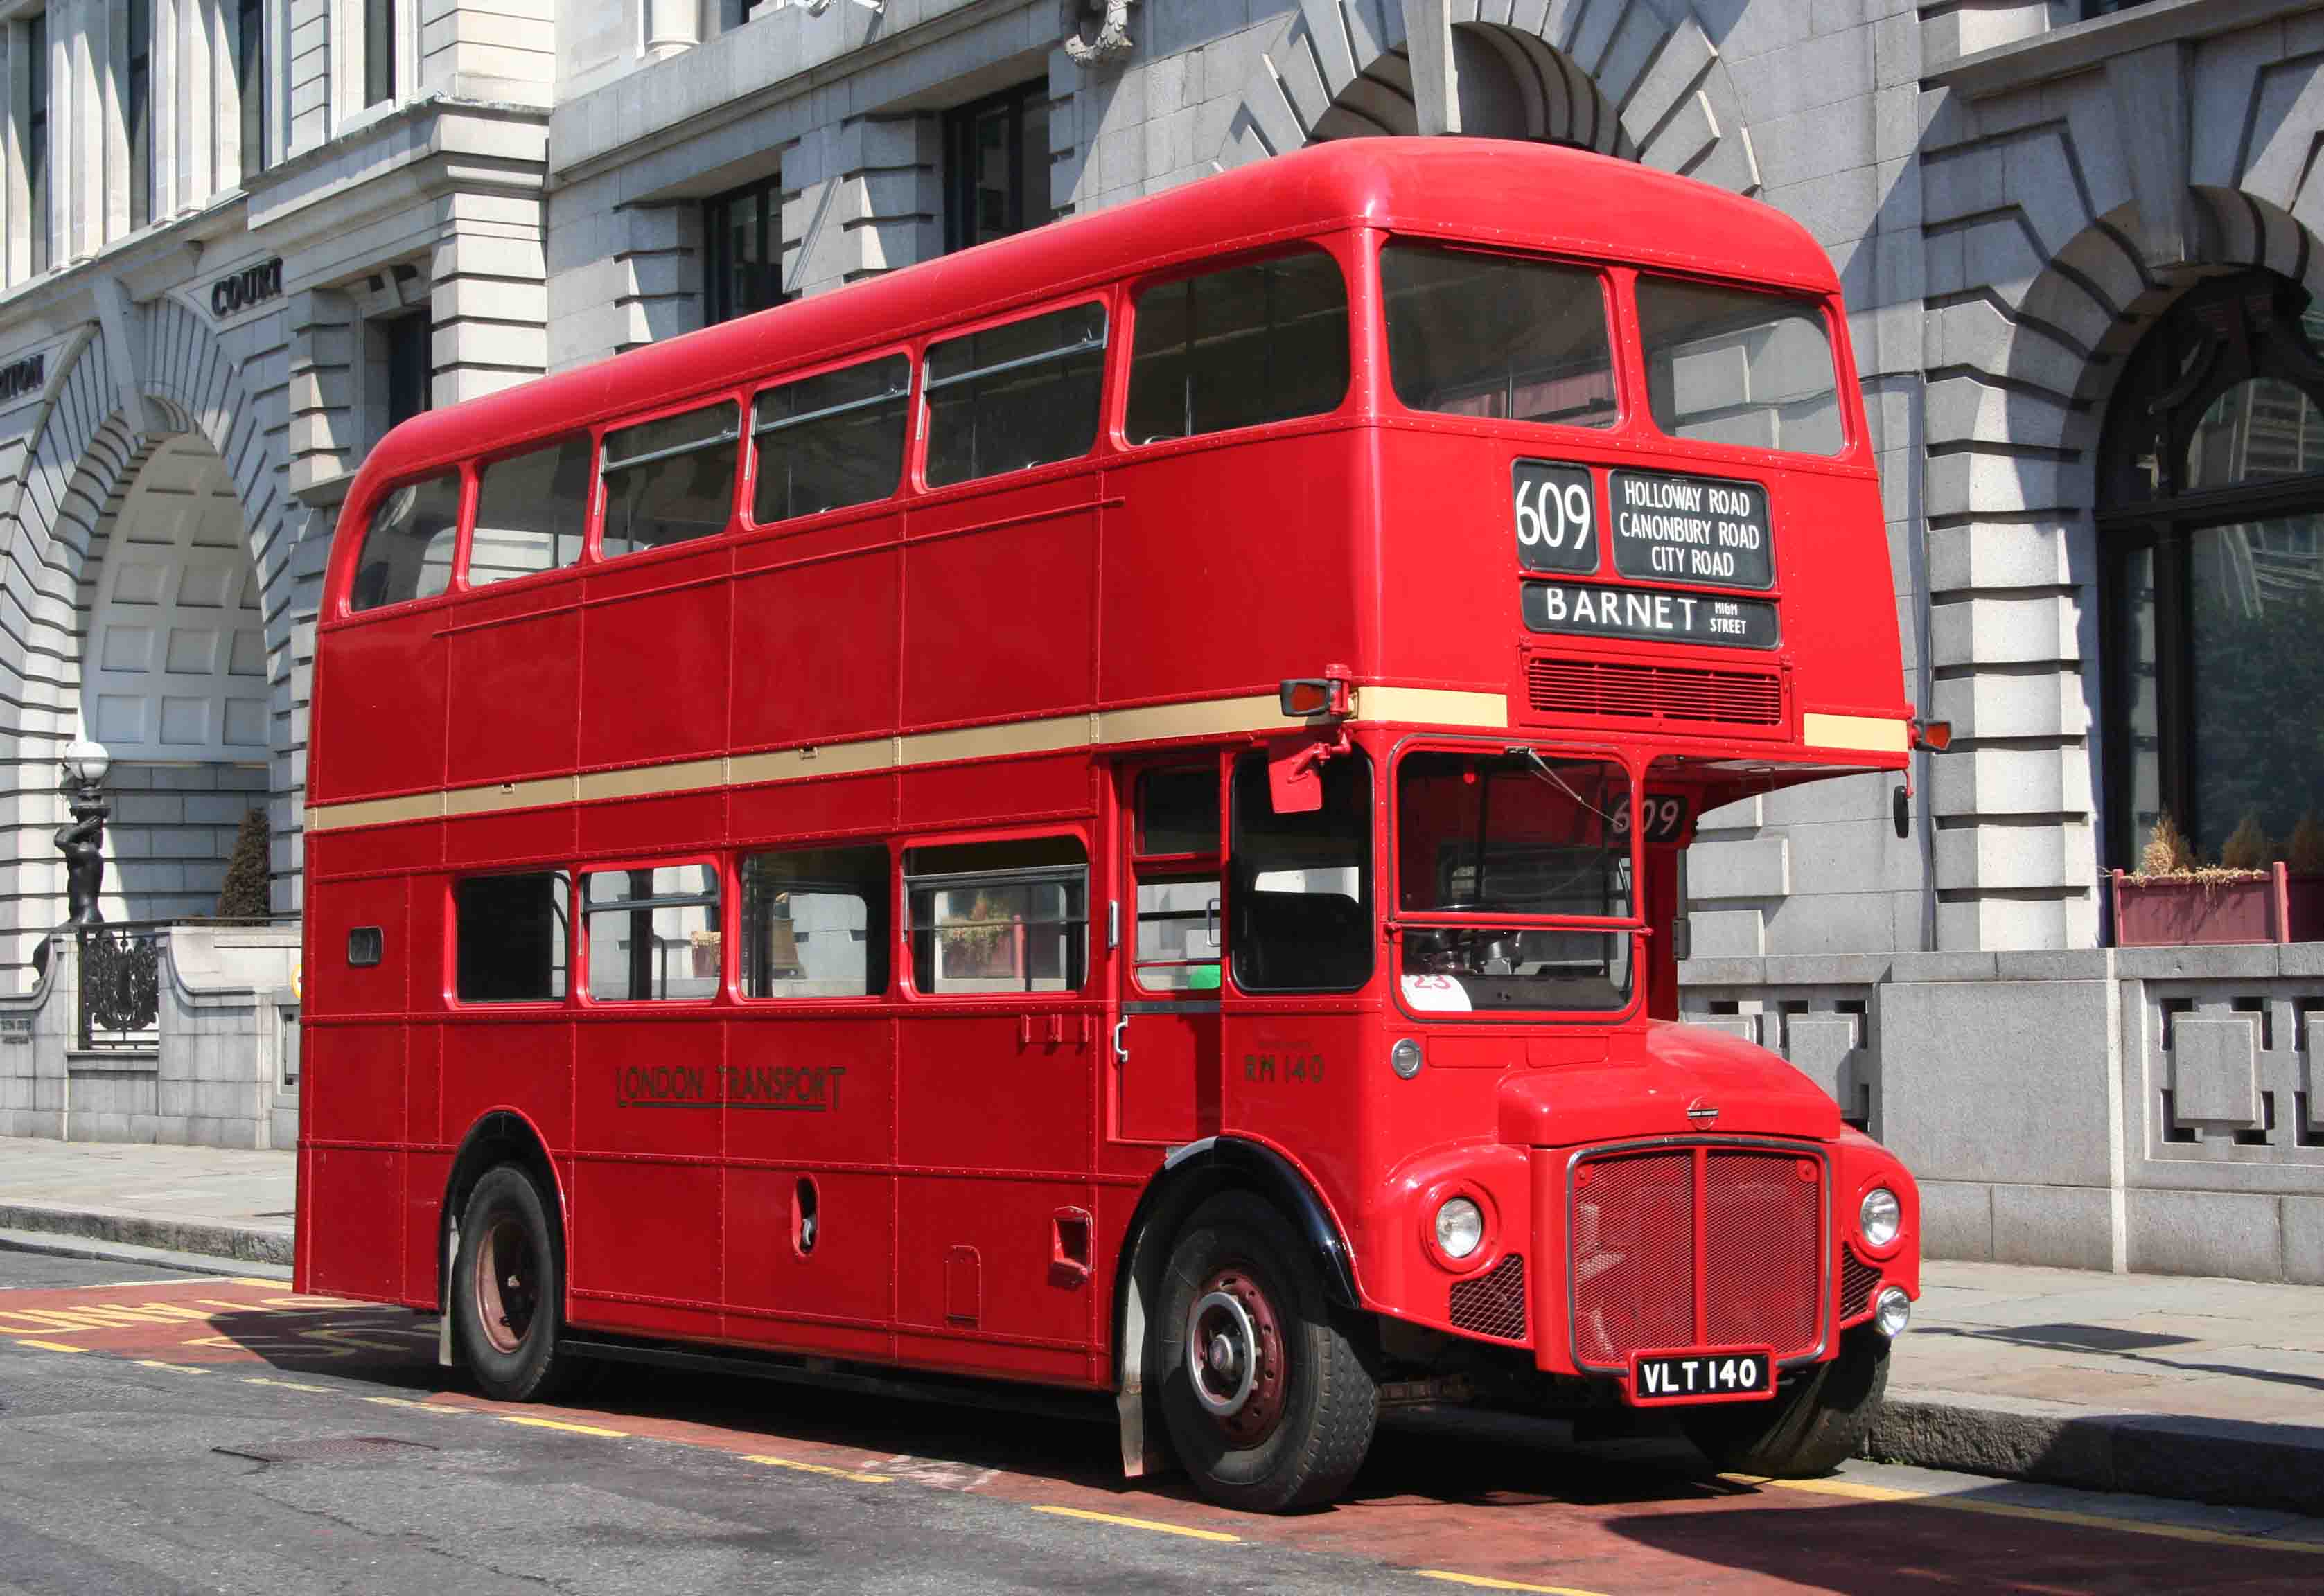 Membership of the Routemaster Association